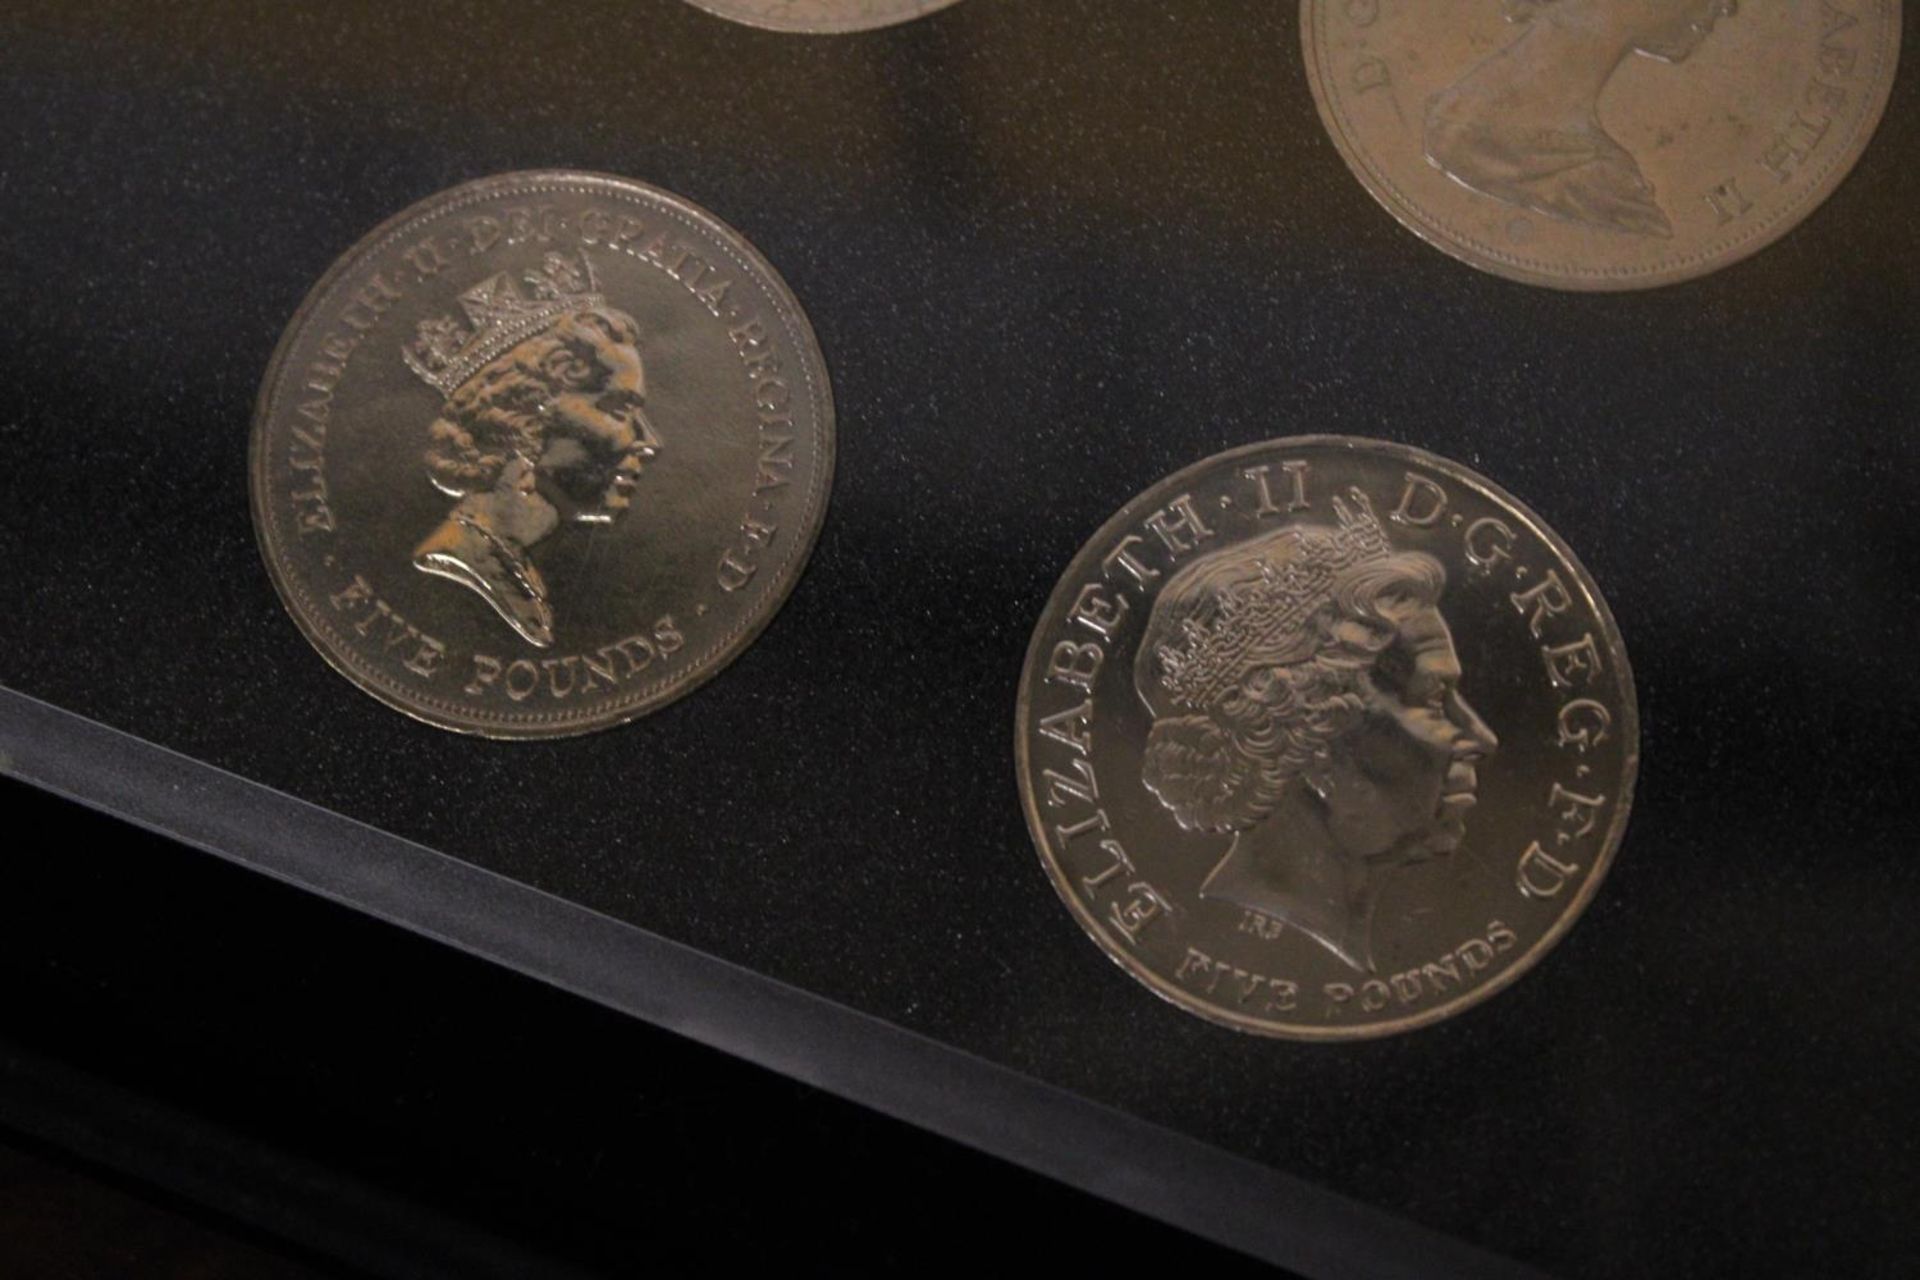 A WESTMINSTER BOXED FOUR COIN SET "THE PORTRAITS OF A QUEEN" WITH CERTIFICATE OF AUTHENTICITY - Image 4 of 5